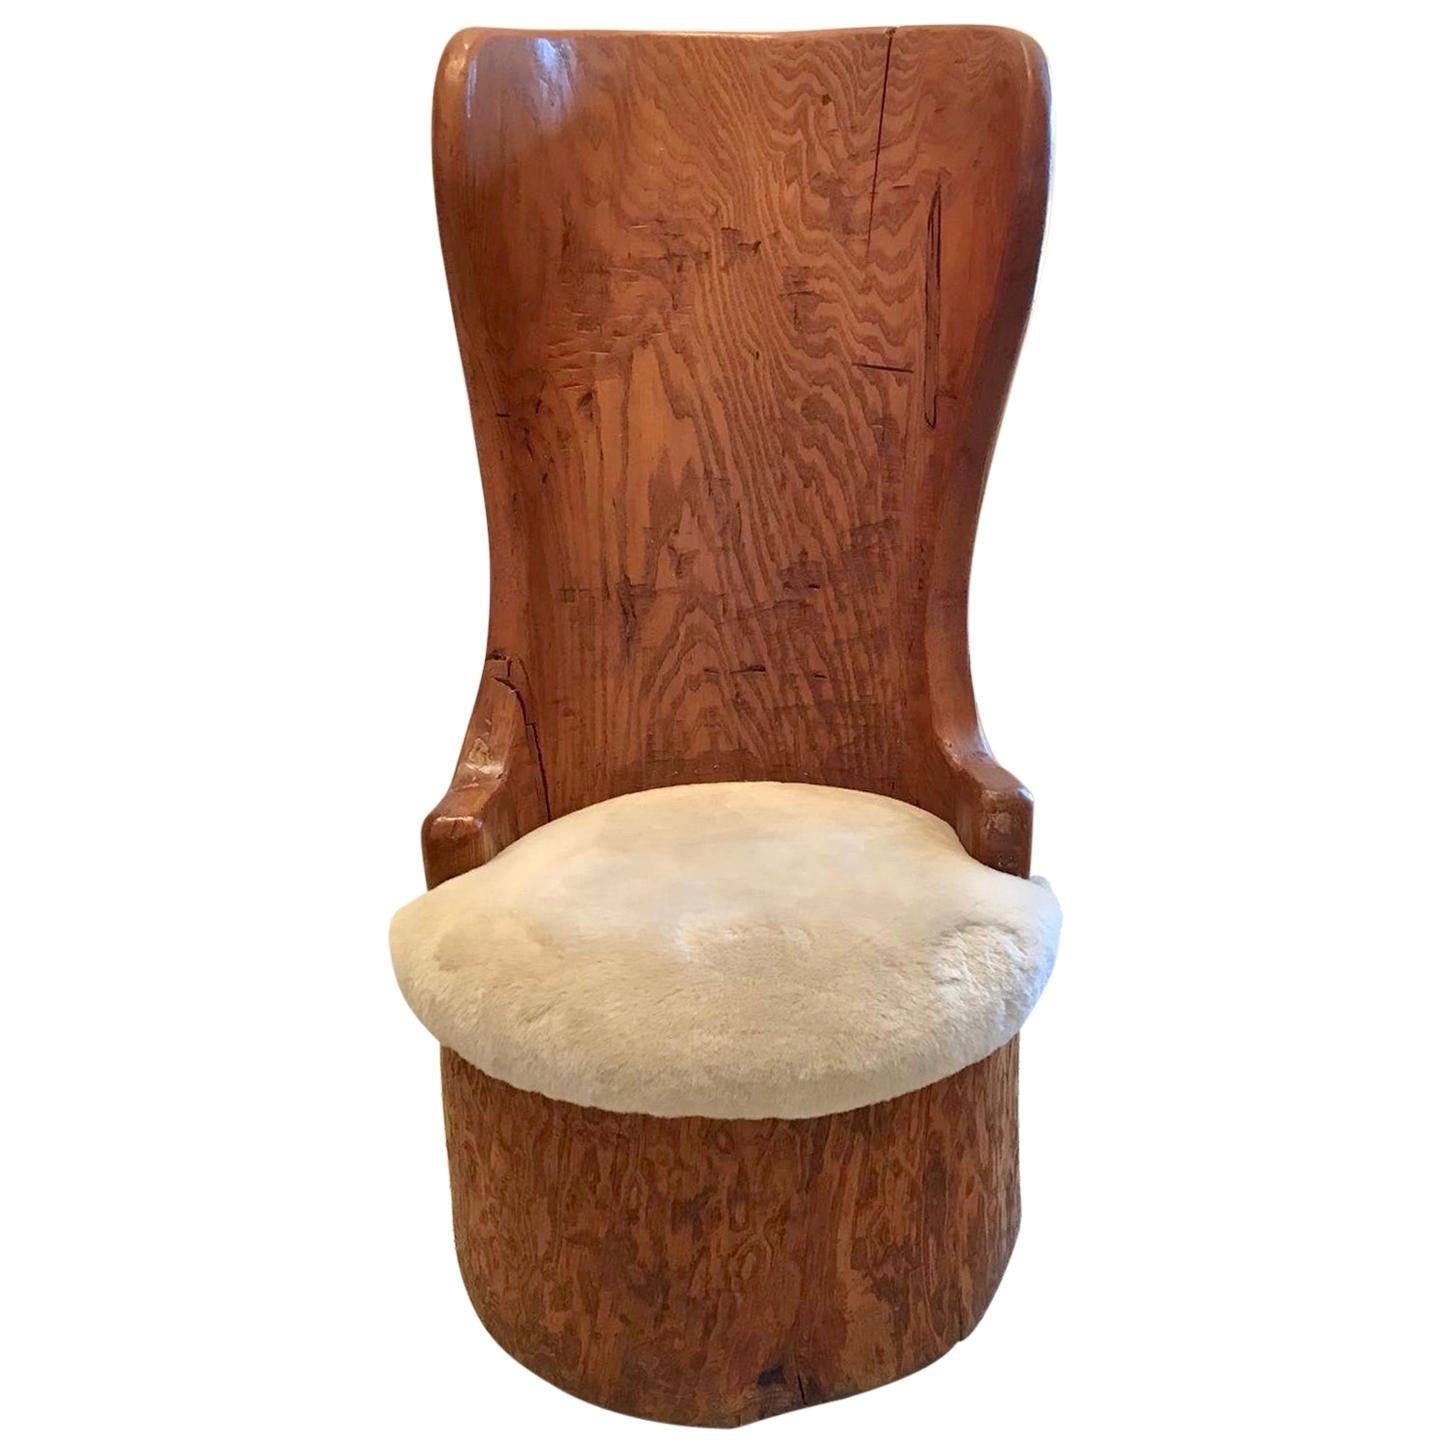 Unique Wood Carved Trunk Chair with Shearling Seat